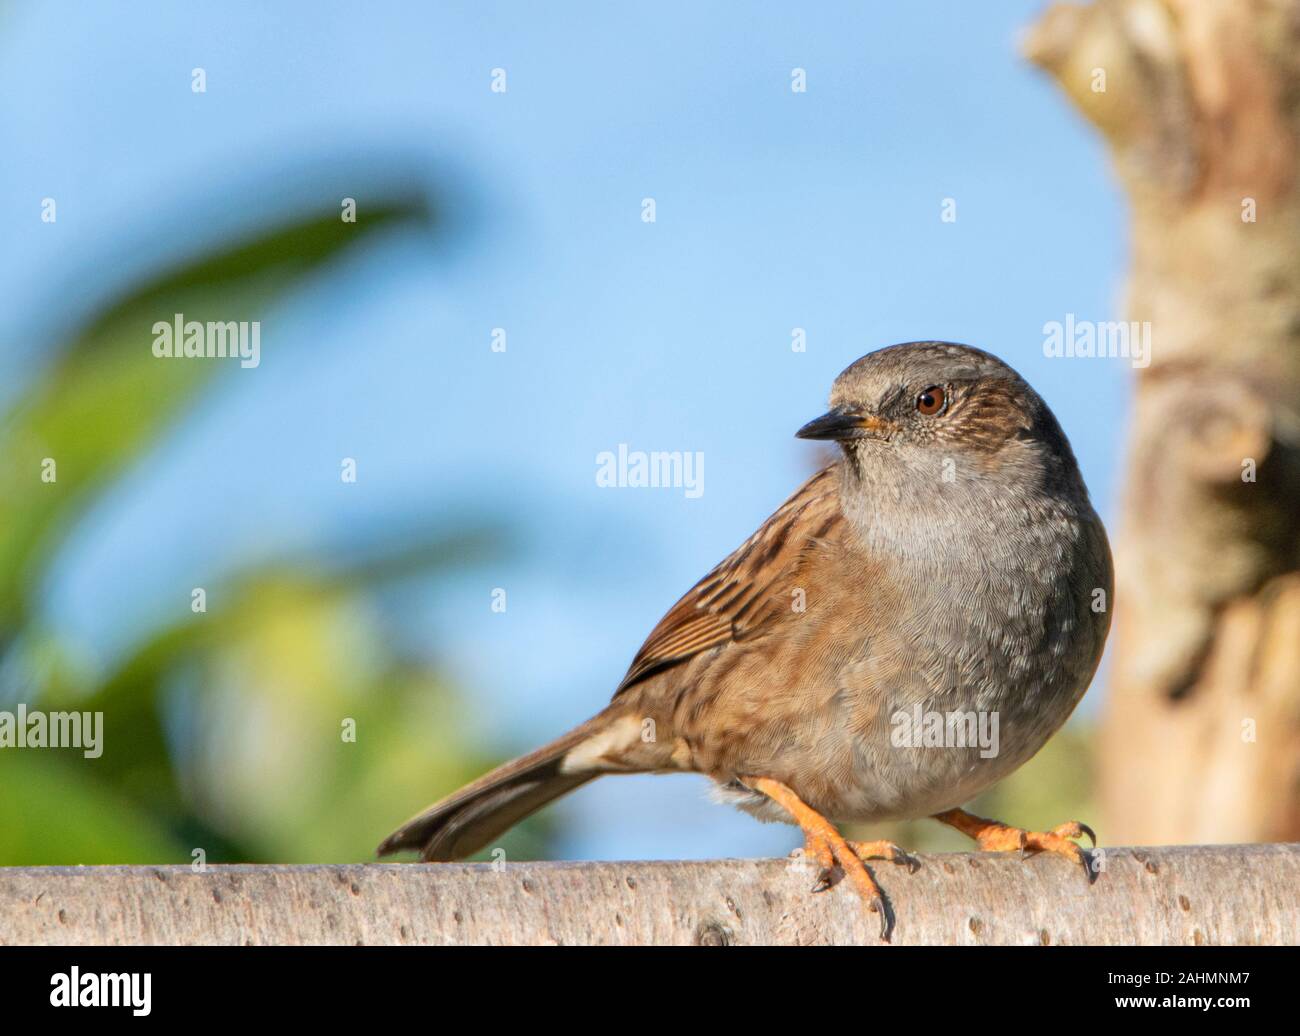 Prunella modularis, Dunnock, small brown bird, perched on a Branch in a UK garden, January 2020 Stock Photo